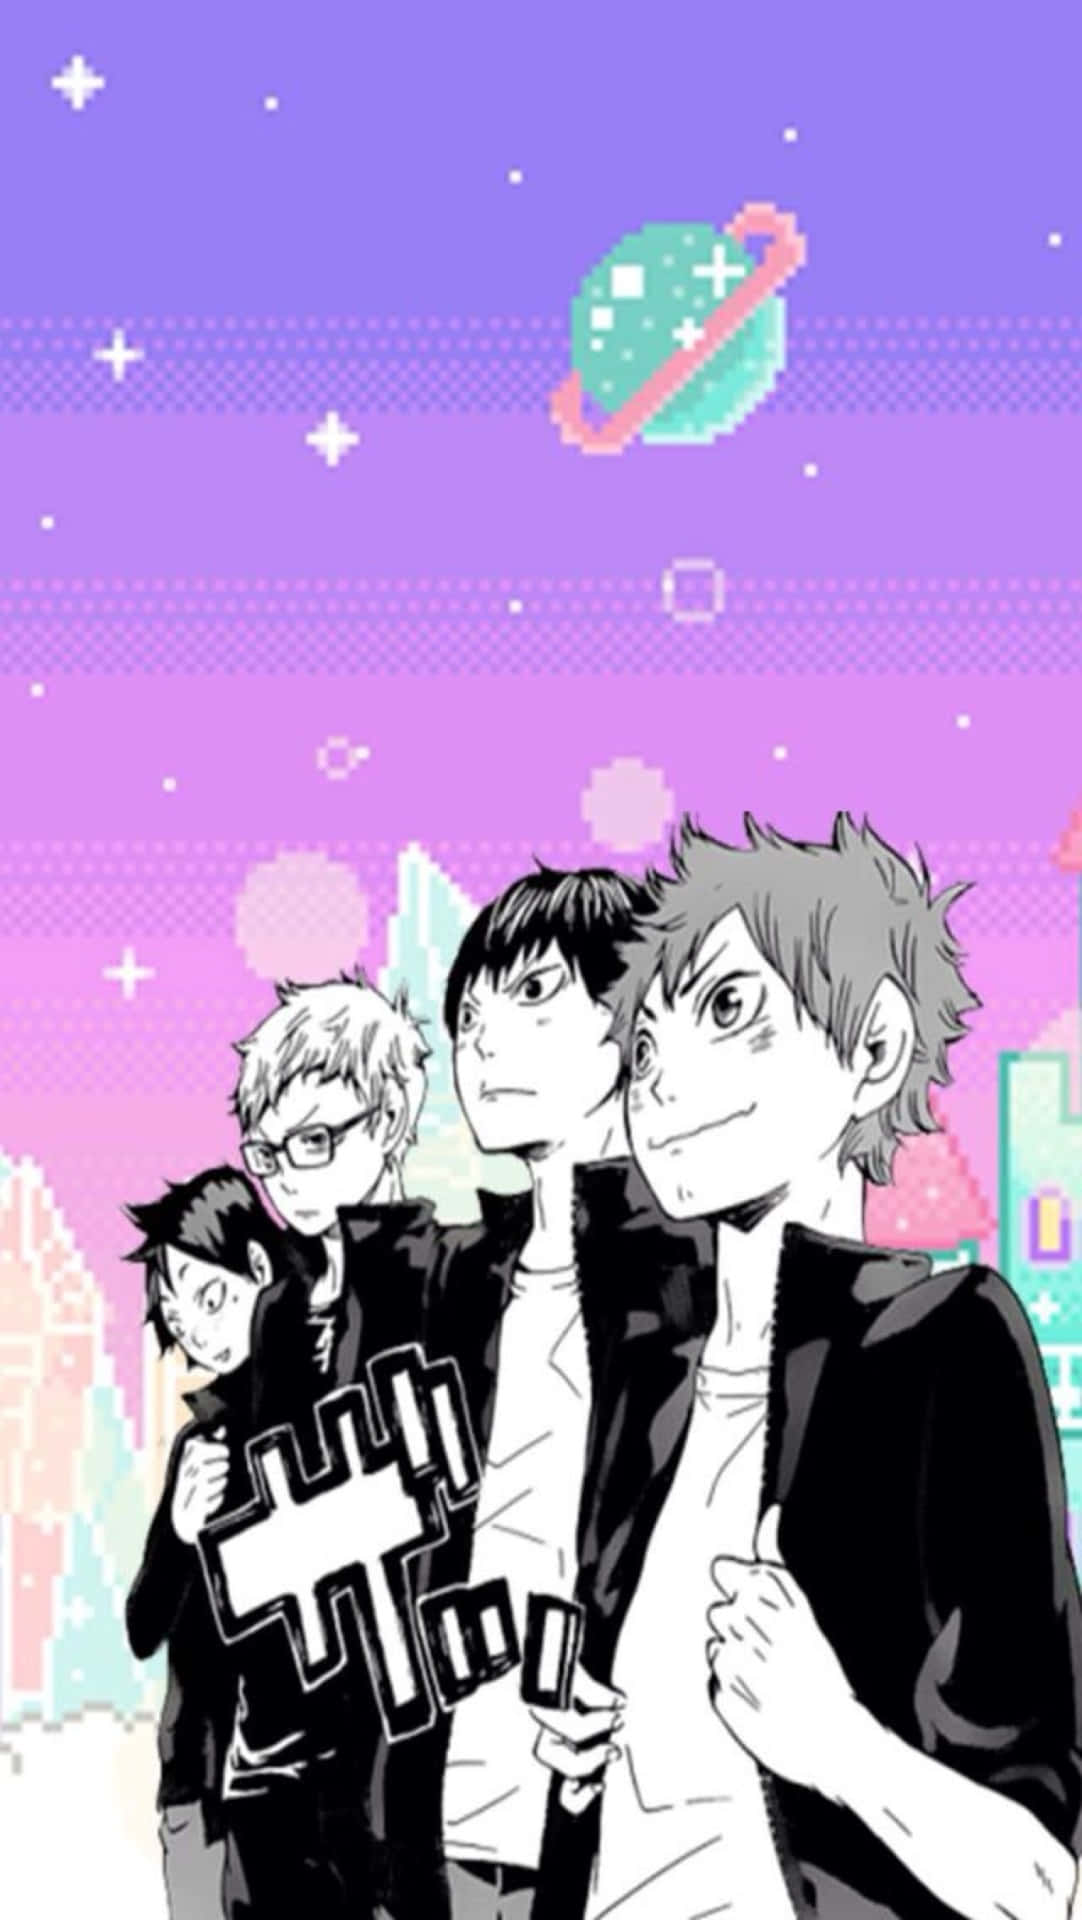 Get Ready to Spike Up Your Phone: Haikyuu Iphone Wallpaper